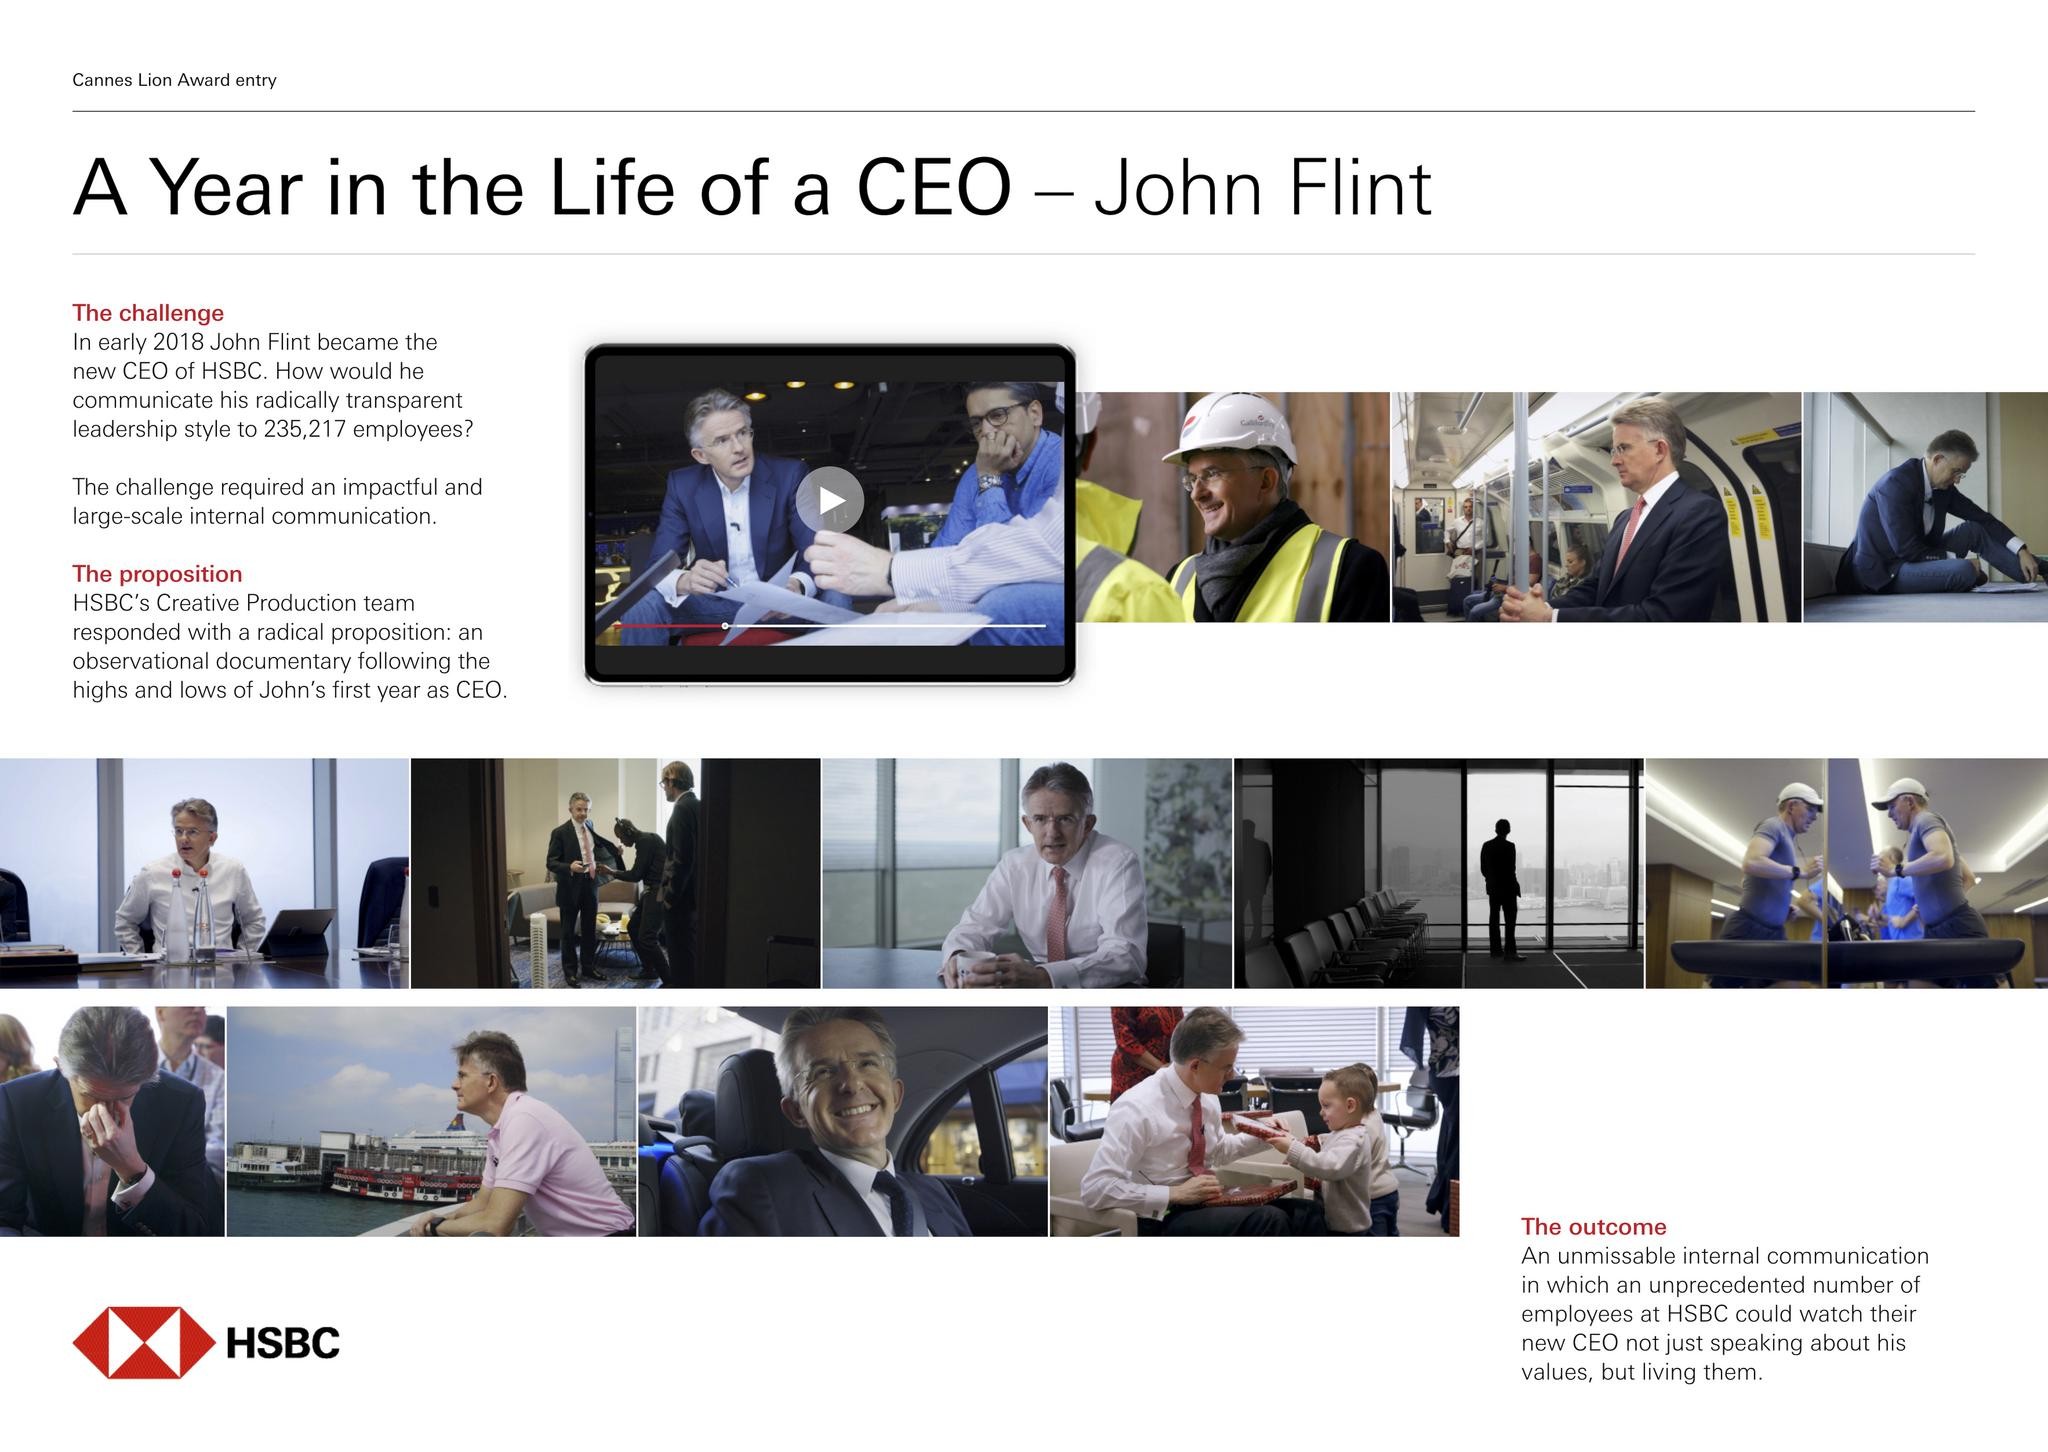 A Year in the Life of a CEO - John Flint